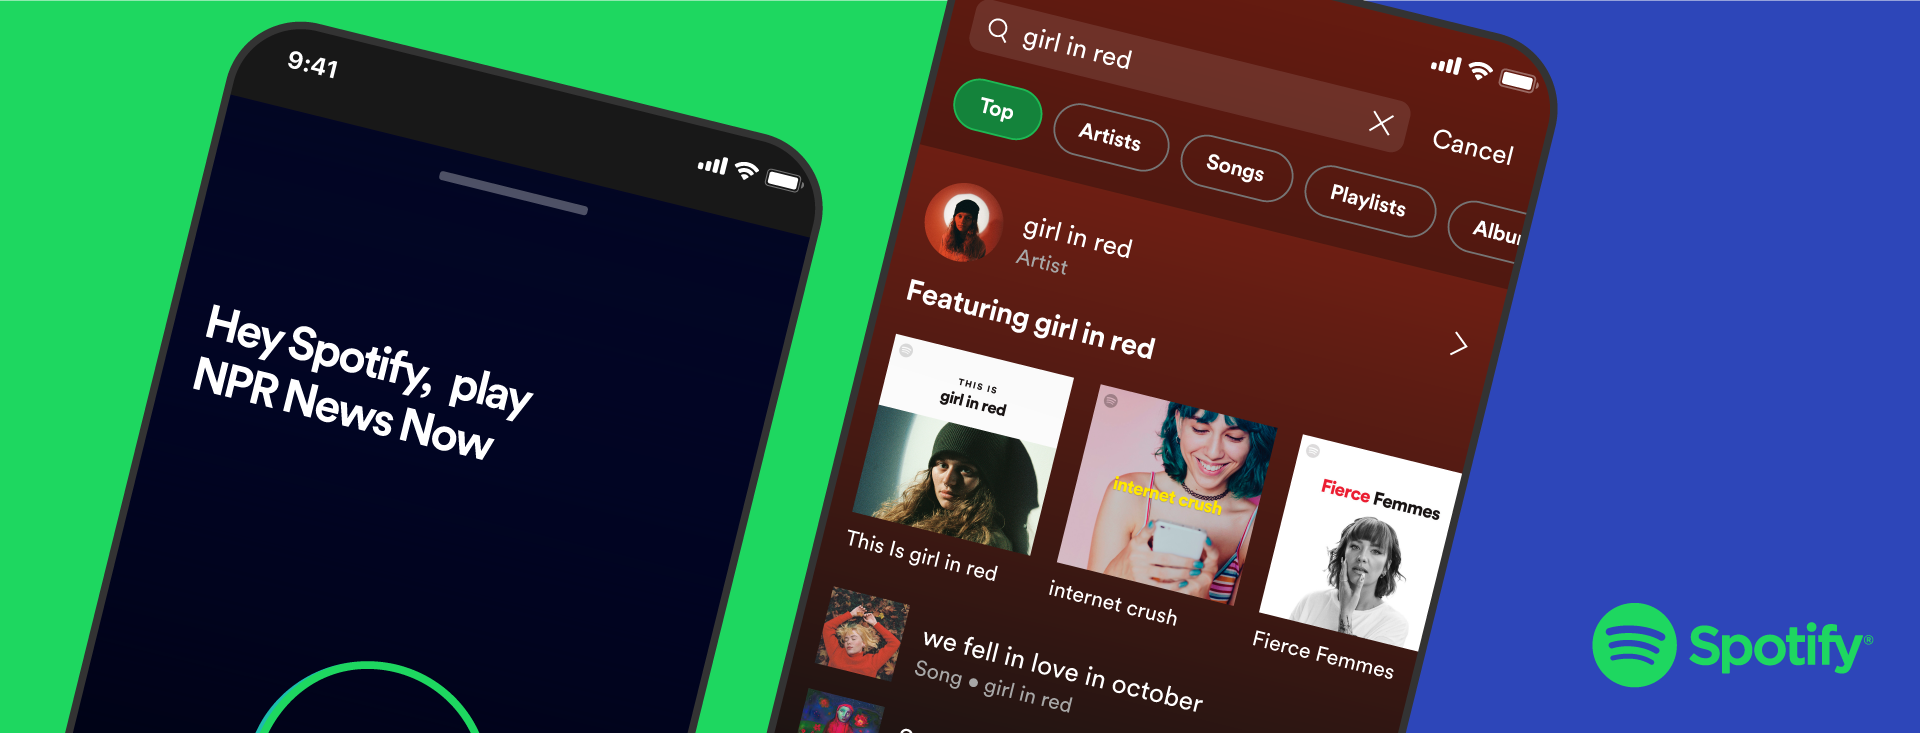 How to search like a pro on Spotify – filters, lyrics and voice search explained